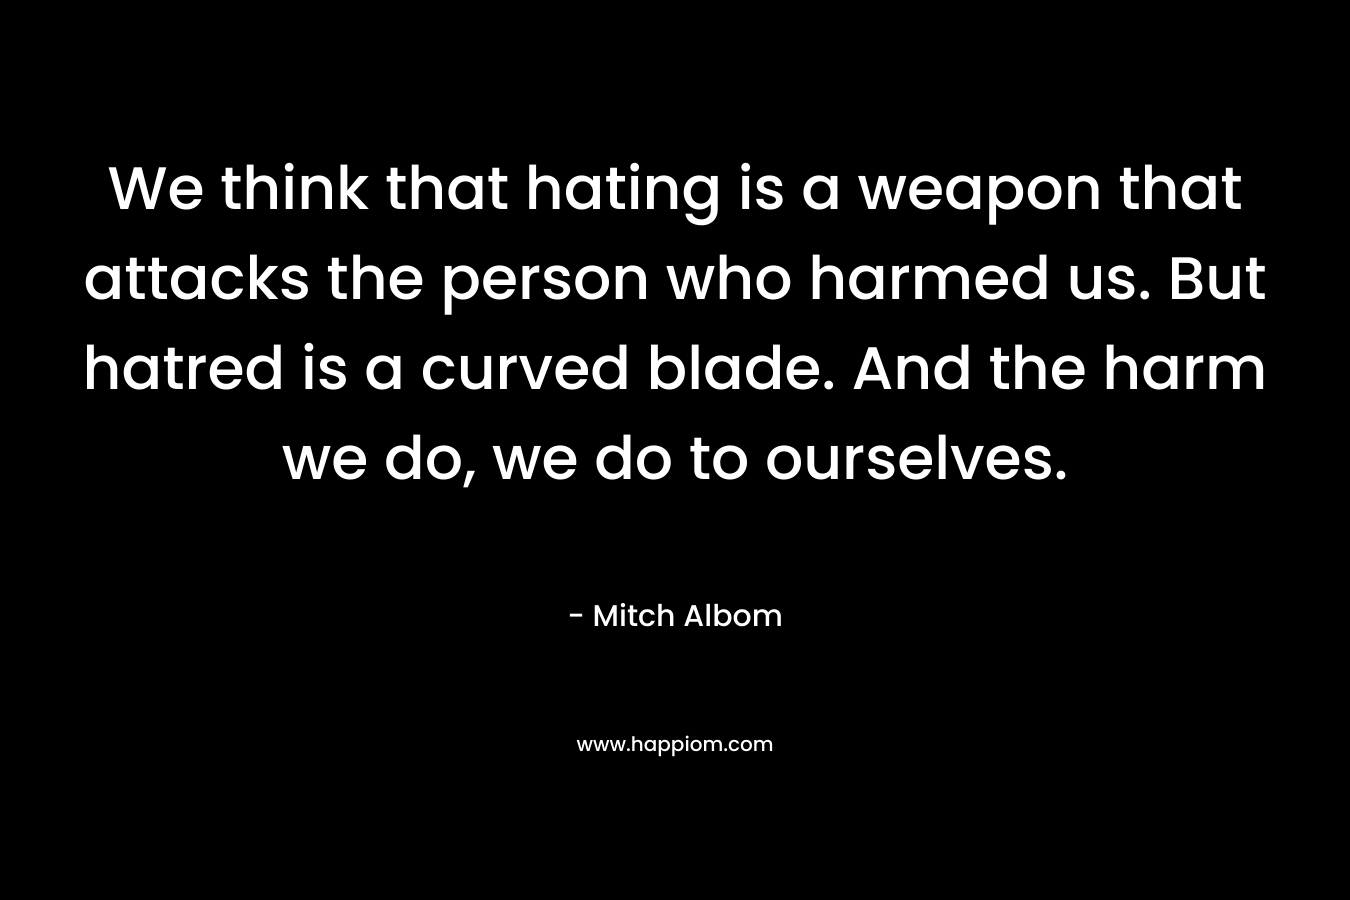 We think that hating is a weapon that attacks the person who harmed us. But hatred is a curved blade. And the harm we do, we do to ourselves. – Mitch Albom